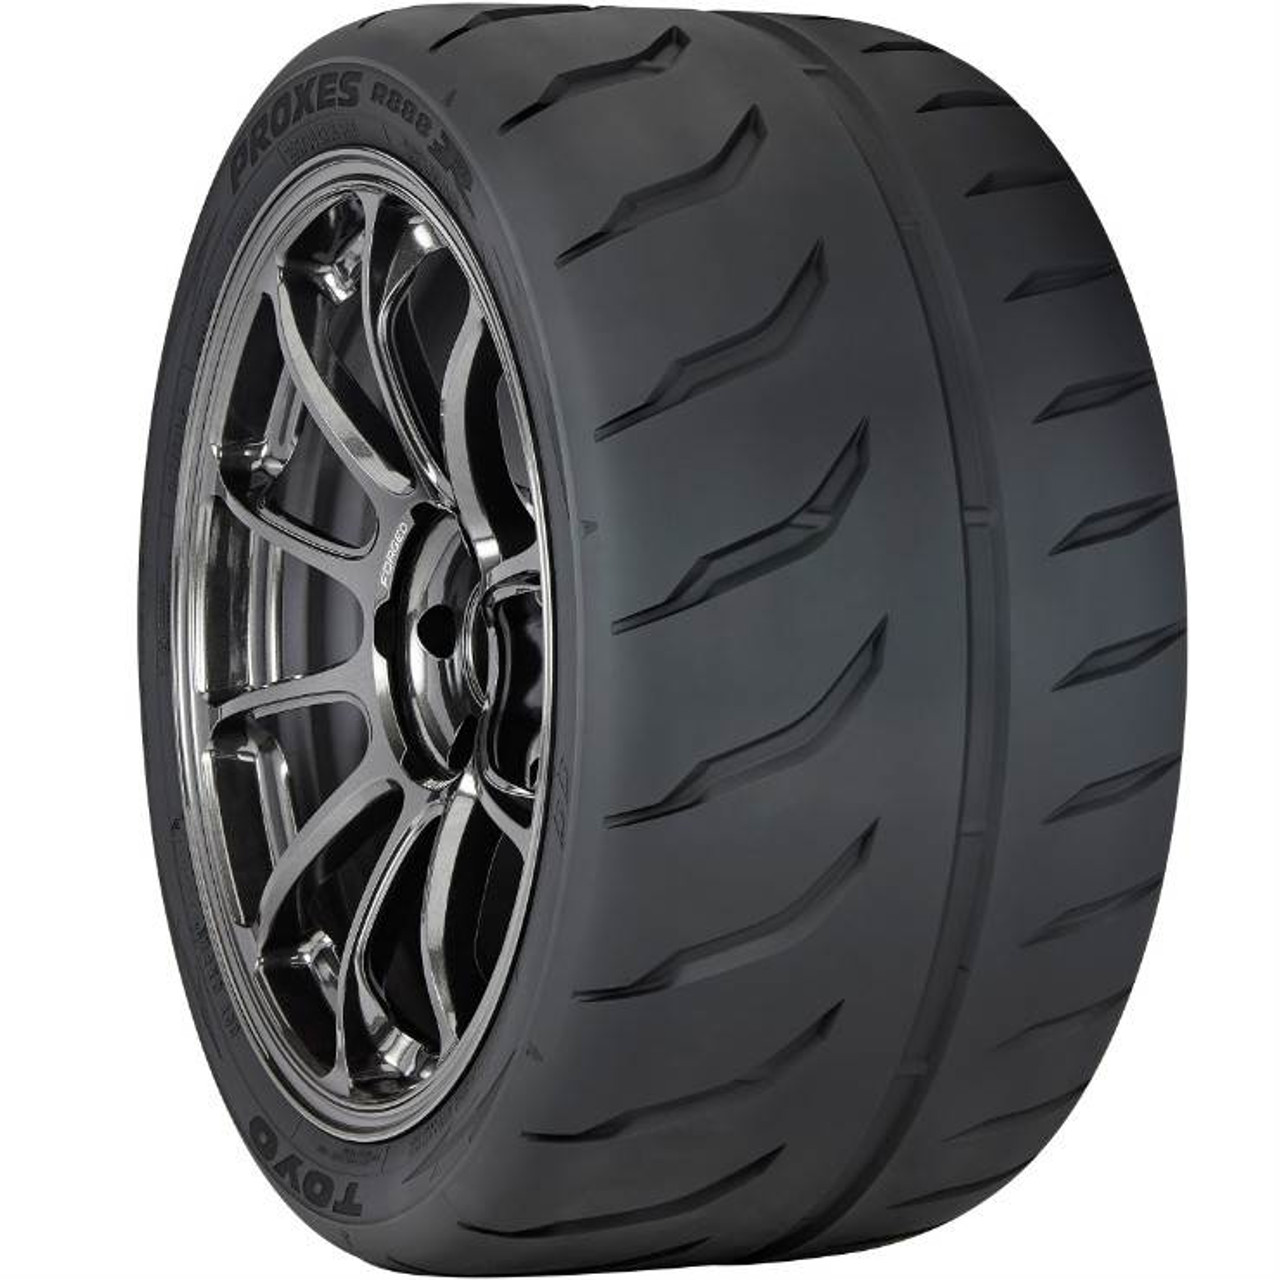 16-22+ Camaro, Corvette, Others, Proxes R888R DOT Competition Tire, 305/30ZR19, Toyo Tires